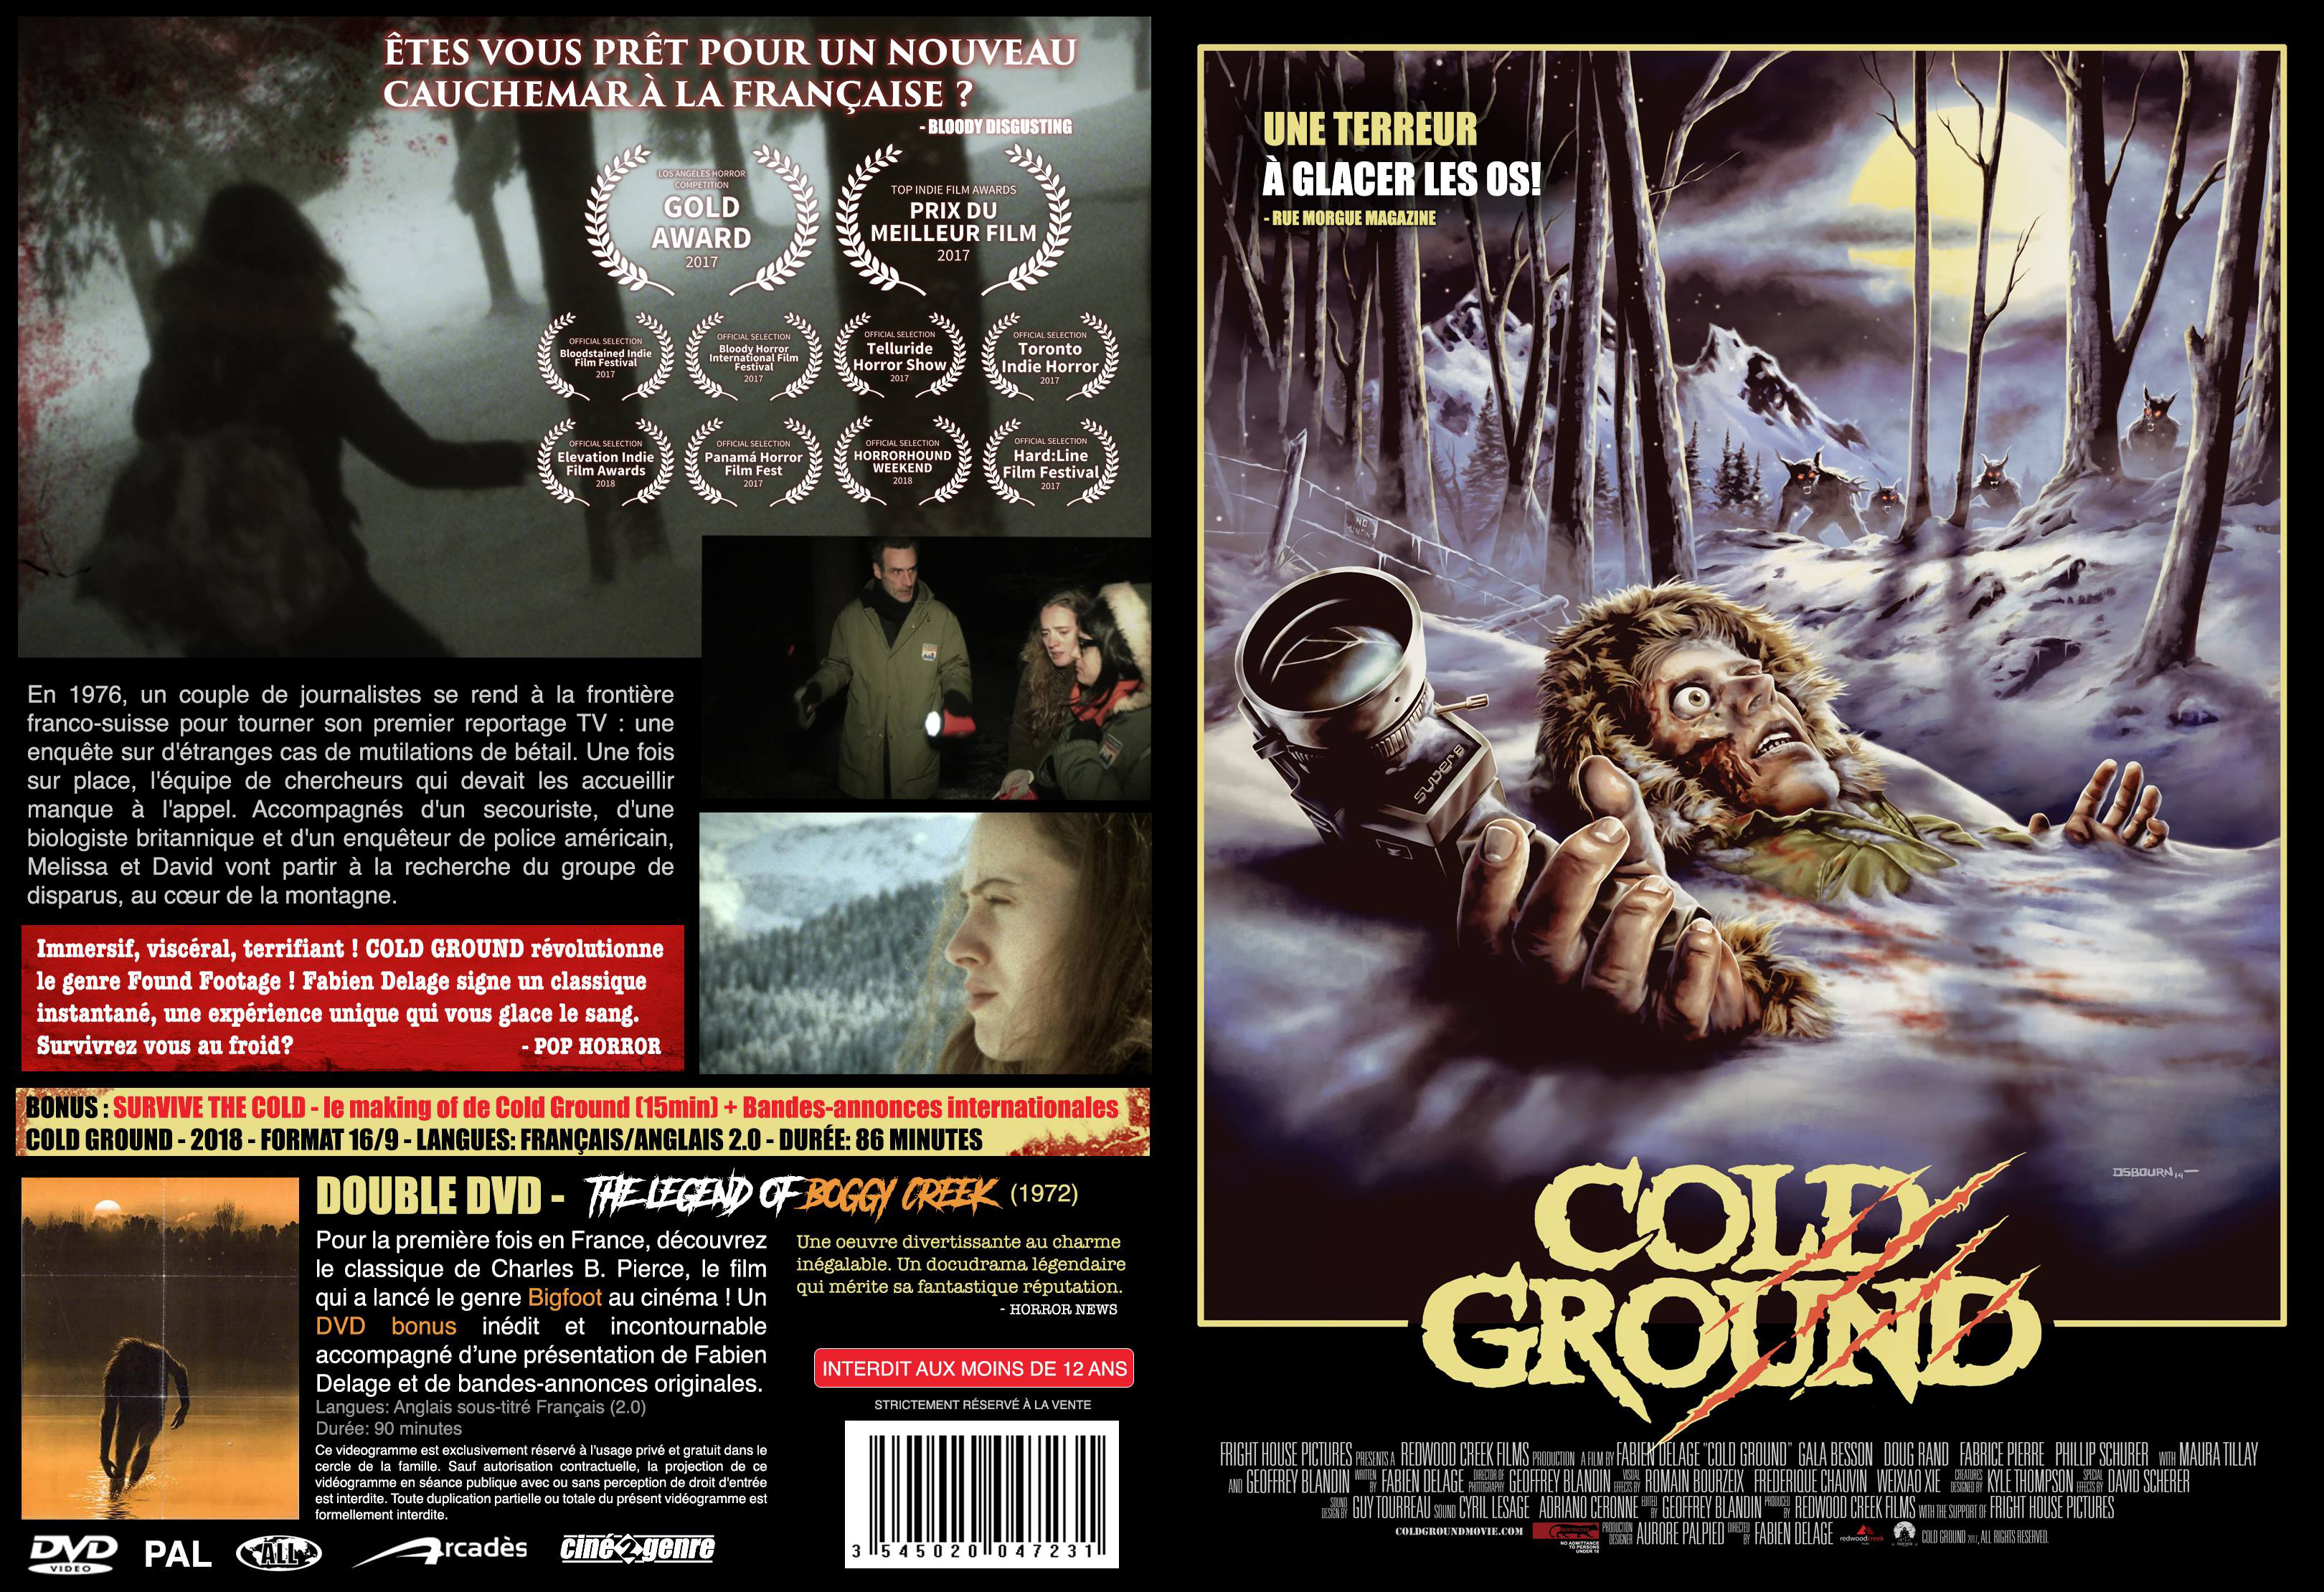 Jaquette DVD Cold ground